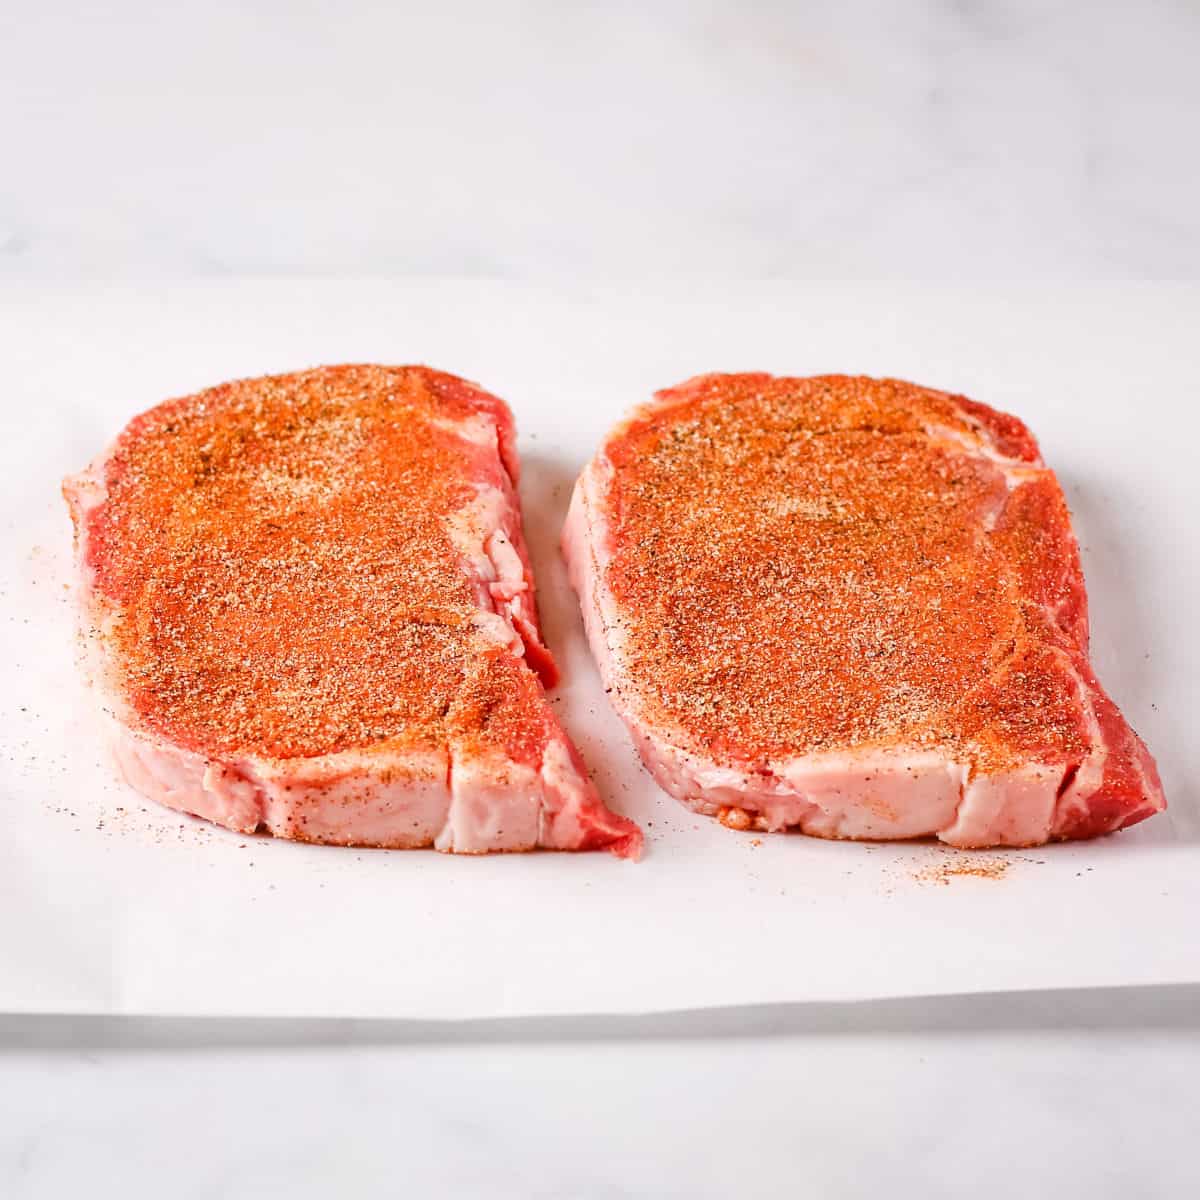 Seasoned ribeye steaks on a white plate lined with paper towels.